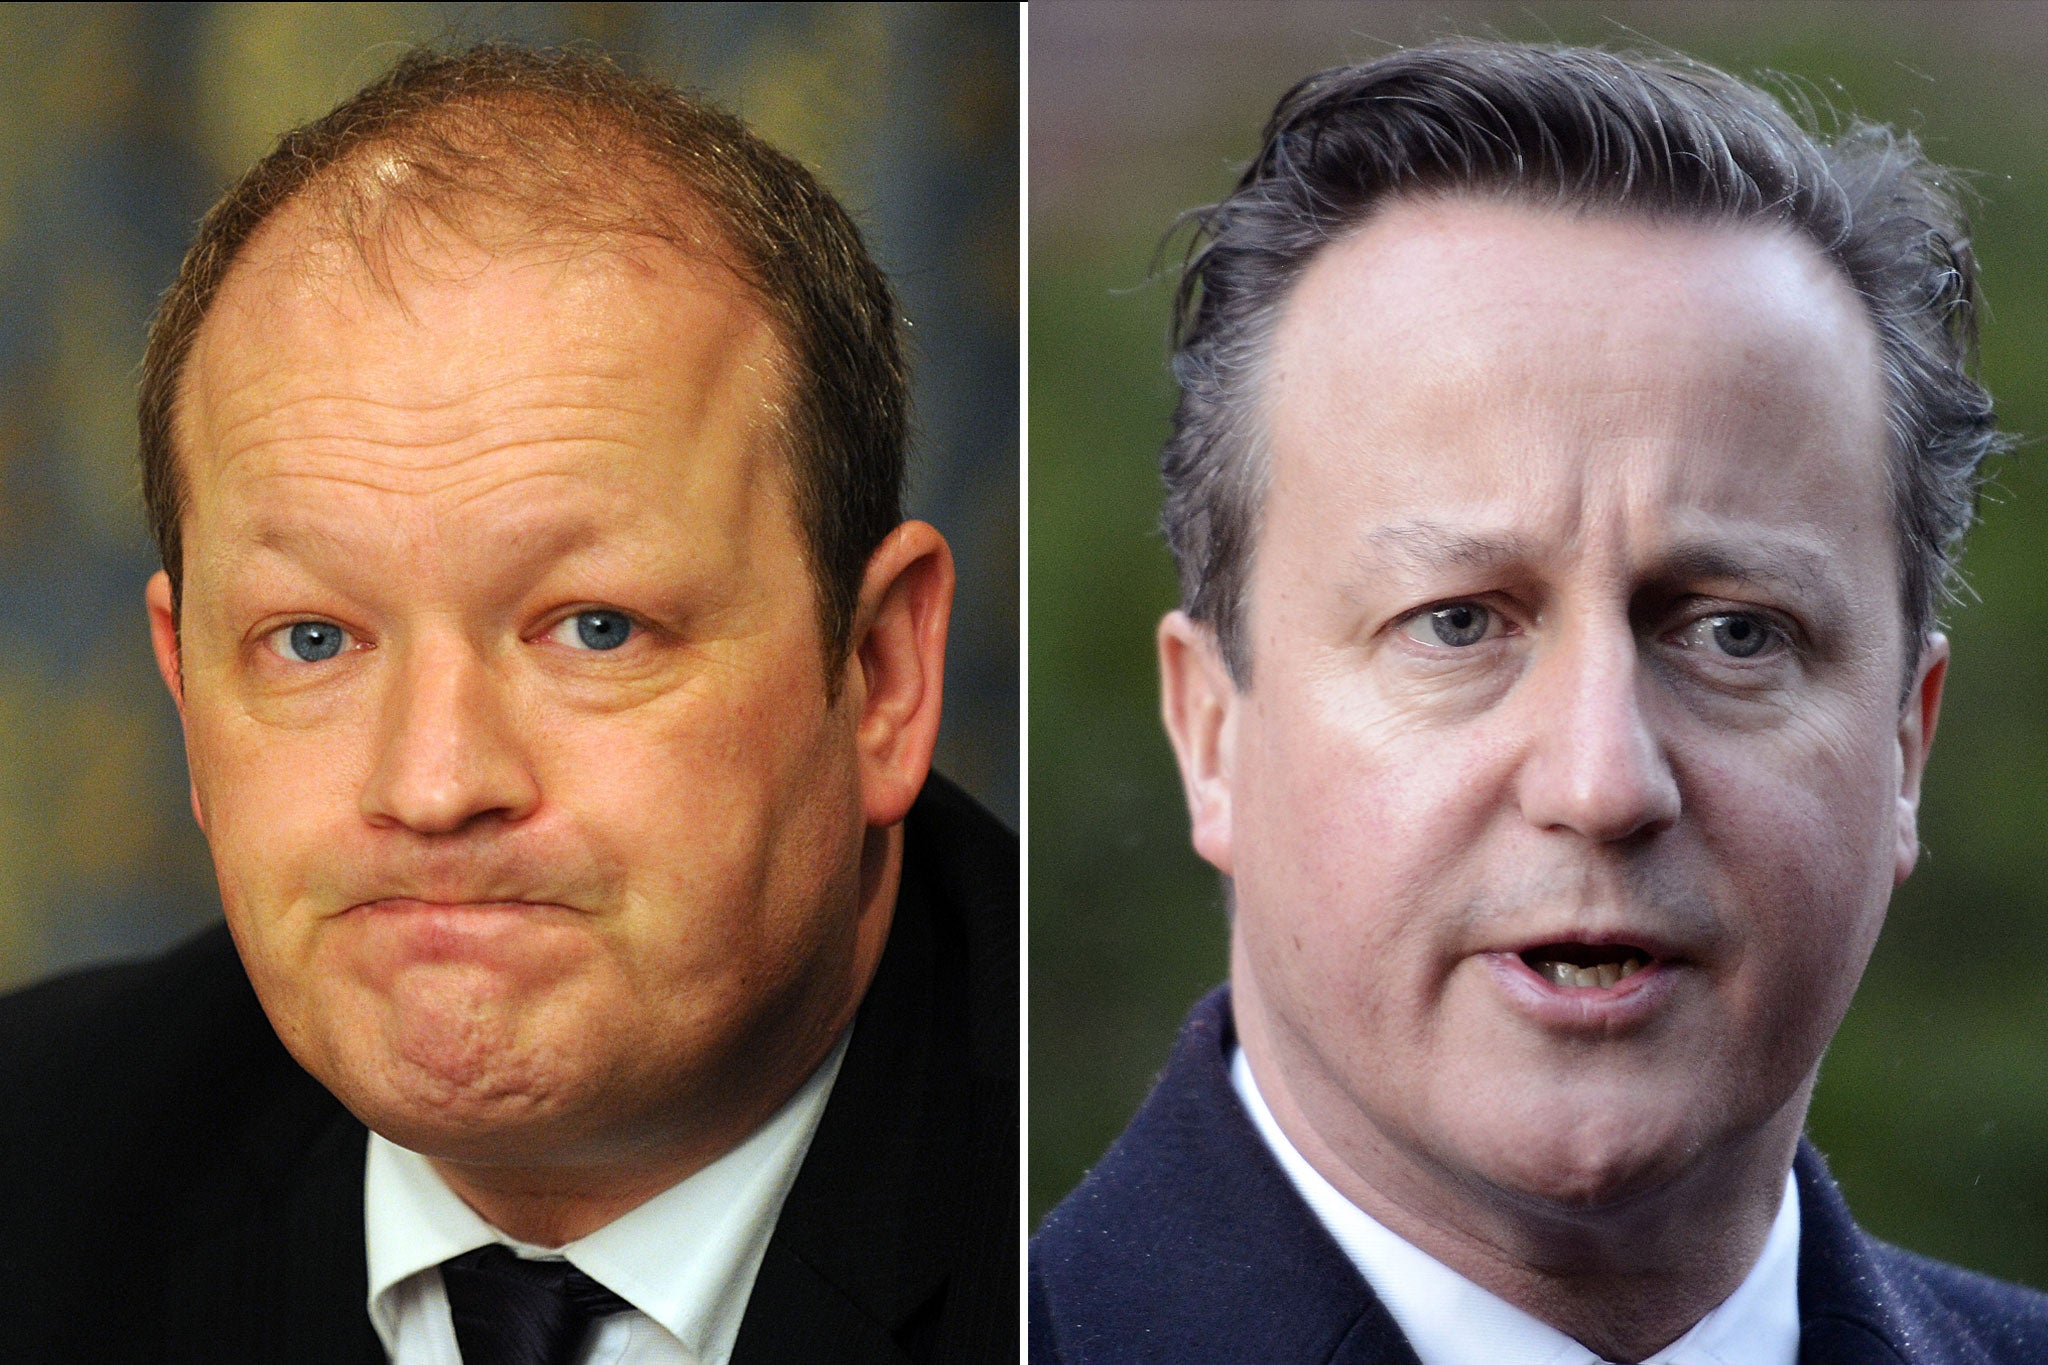 Simon Danczuk has accused David Cameron of being "dismissive" of sexual abuse allegations